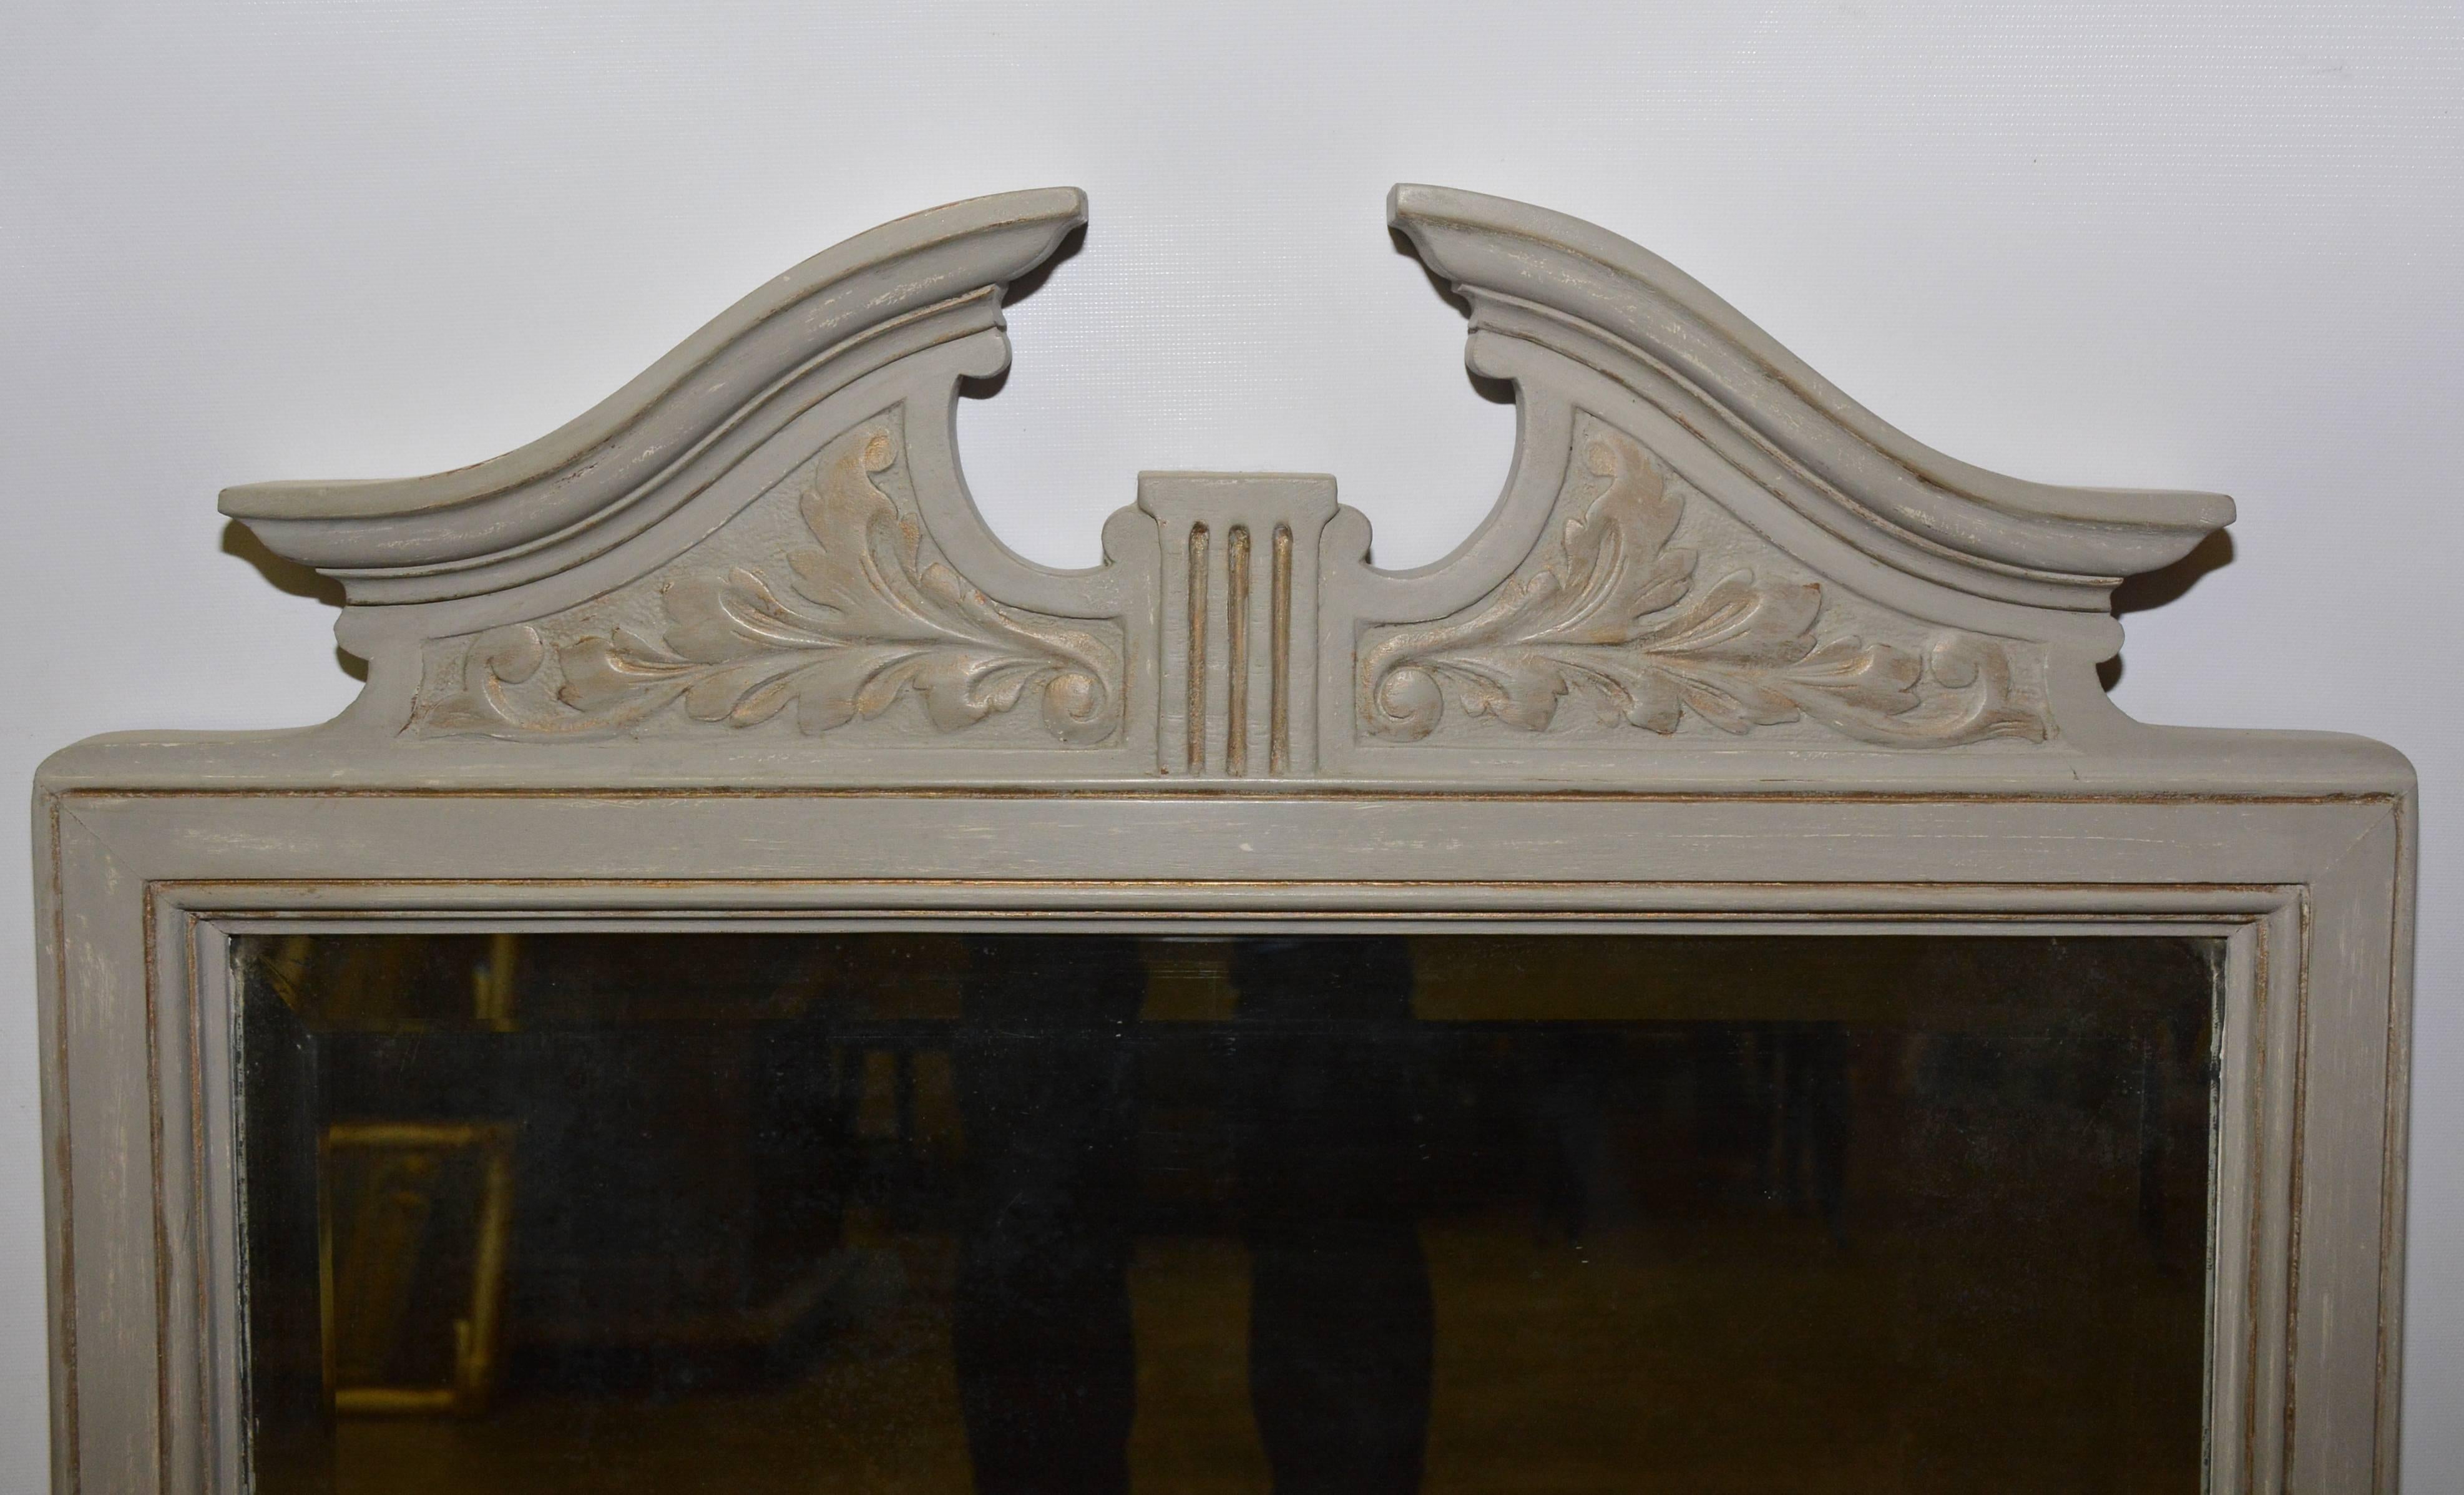 The square mirror frame is painted with a rubbed grey color and has a broken arch pediment decorated with leaves an relief. The silvered mirror is bevelled. The backing is wood and is wired for hanging. 

Dimensions without the pediment: 25